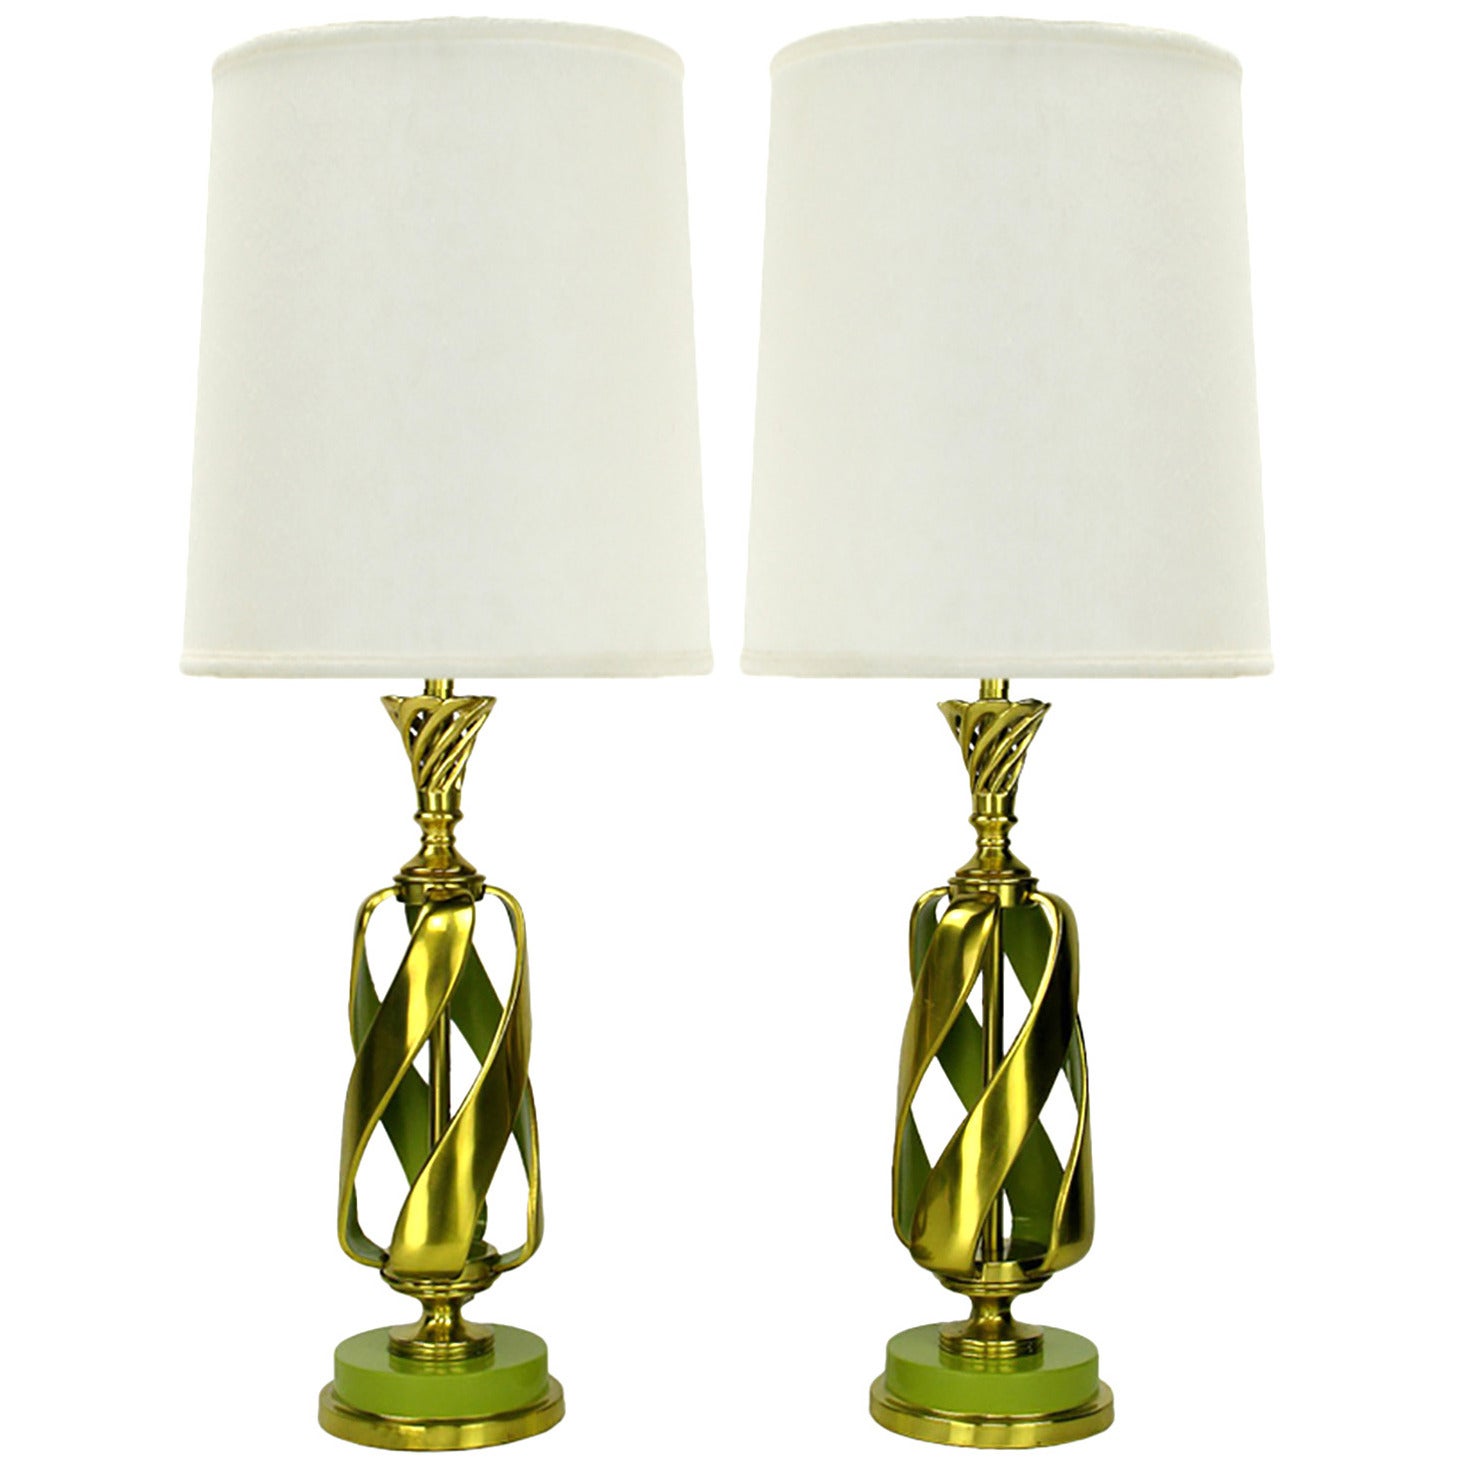 Pair of Rembrandt Stylized Pineapple Form Brass & Chartreuse Lacquer Table Lamps For Sale